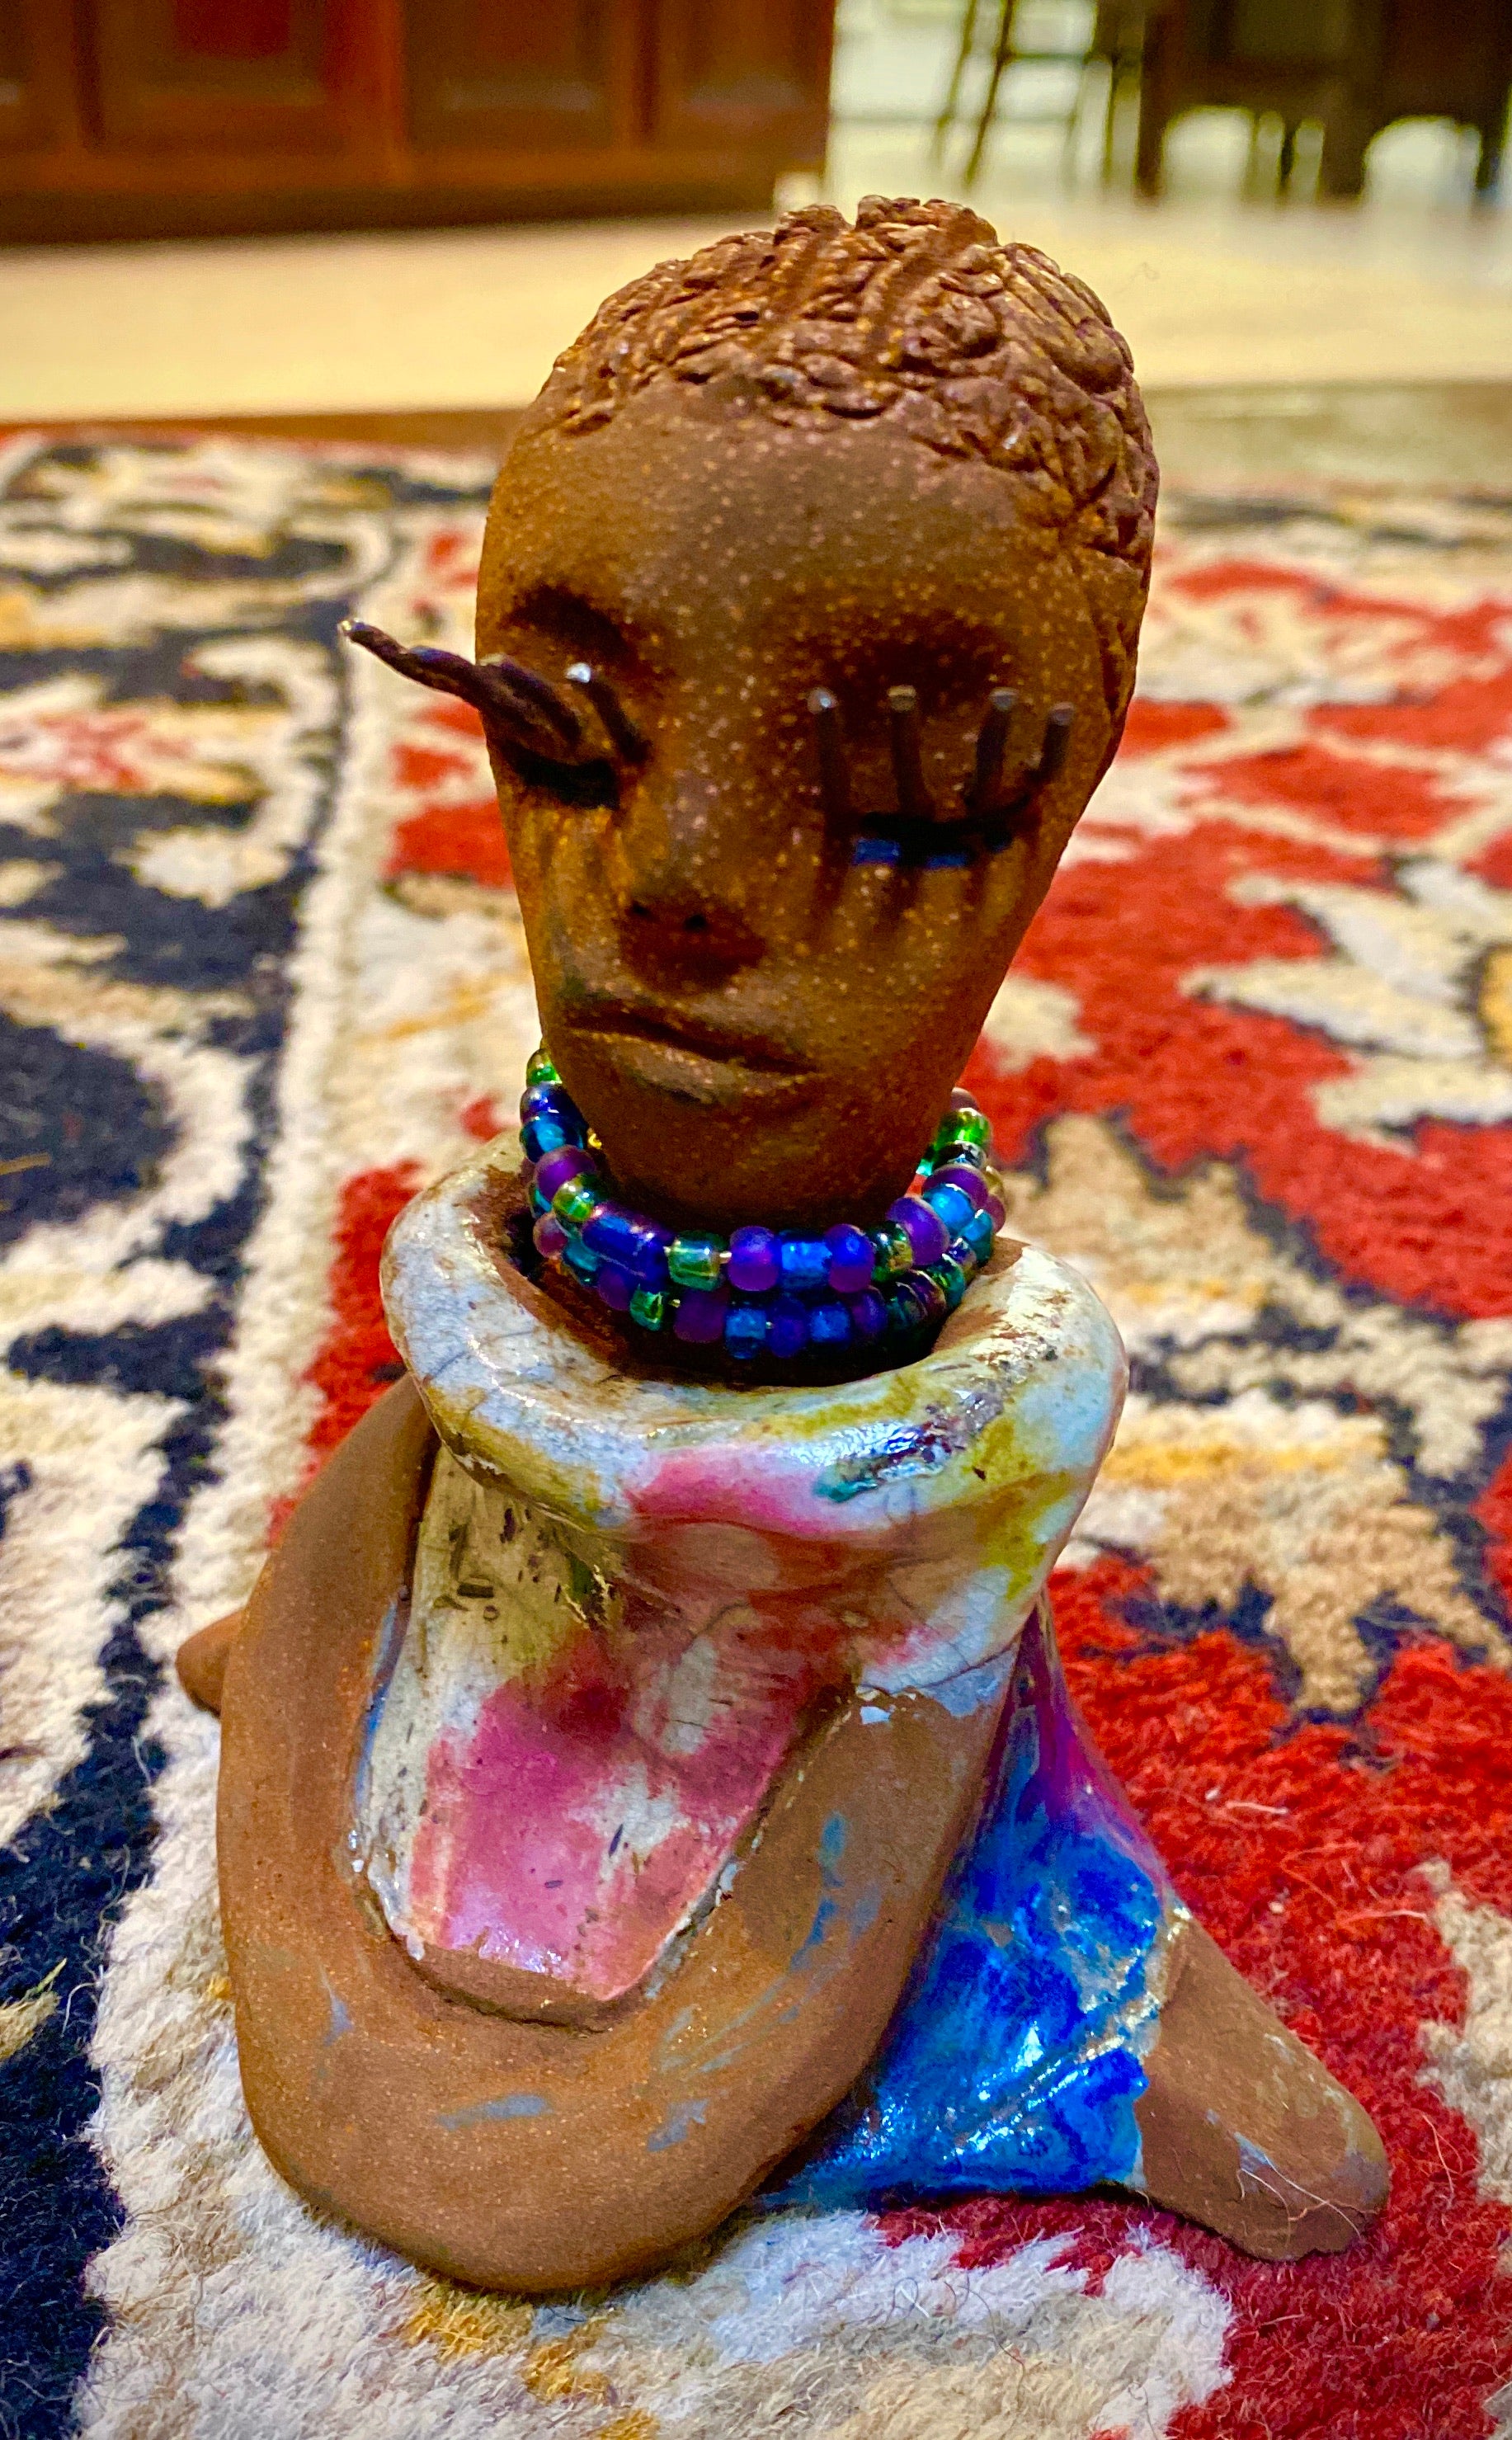 Riley stands 5" x 5”x 3" and weighs  11 ozs.  Riley has a lovely multicolored glossy dress with a matching beaded necklace.  She has long lashes!  Riley appears to sit in a yoga pose. Her long arms rest at her side.